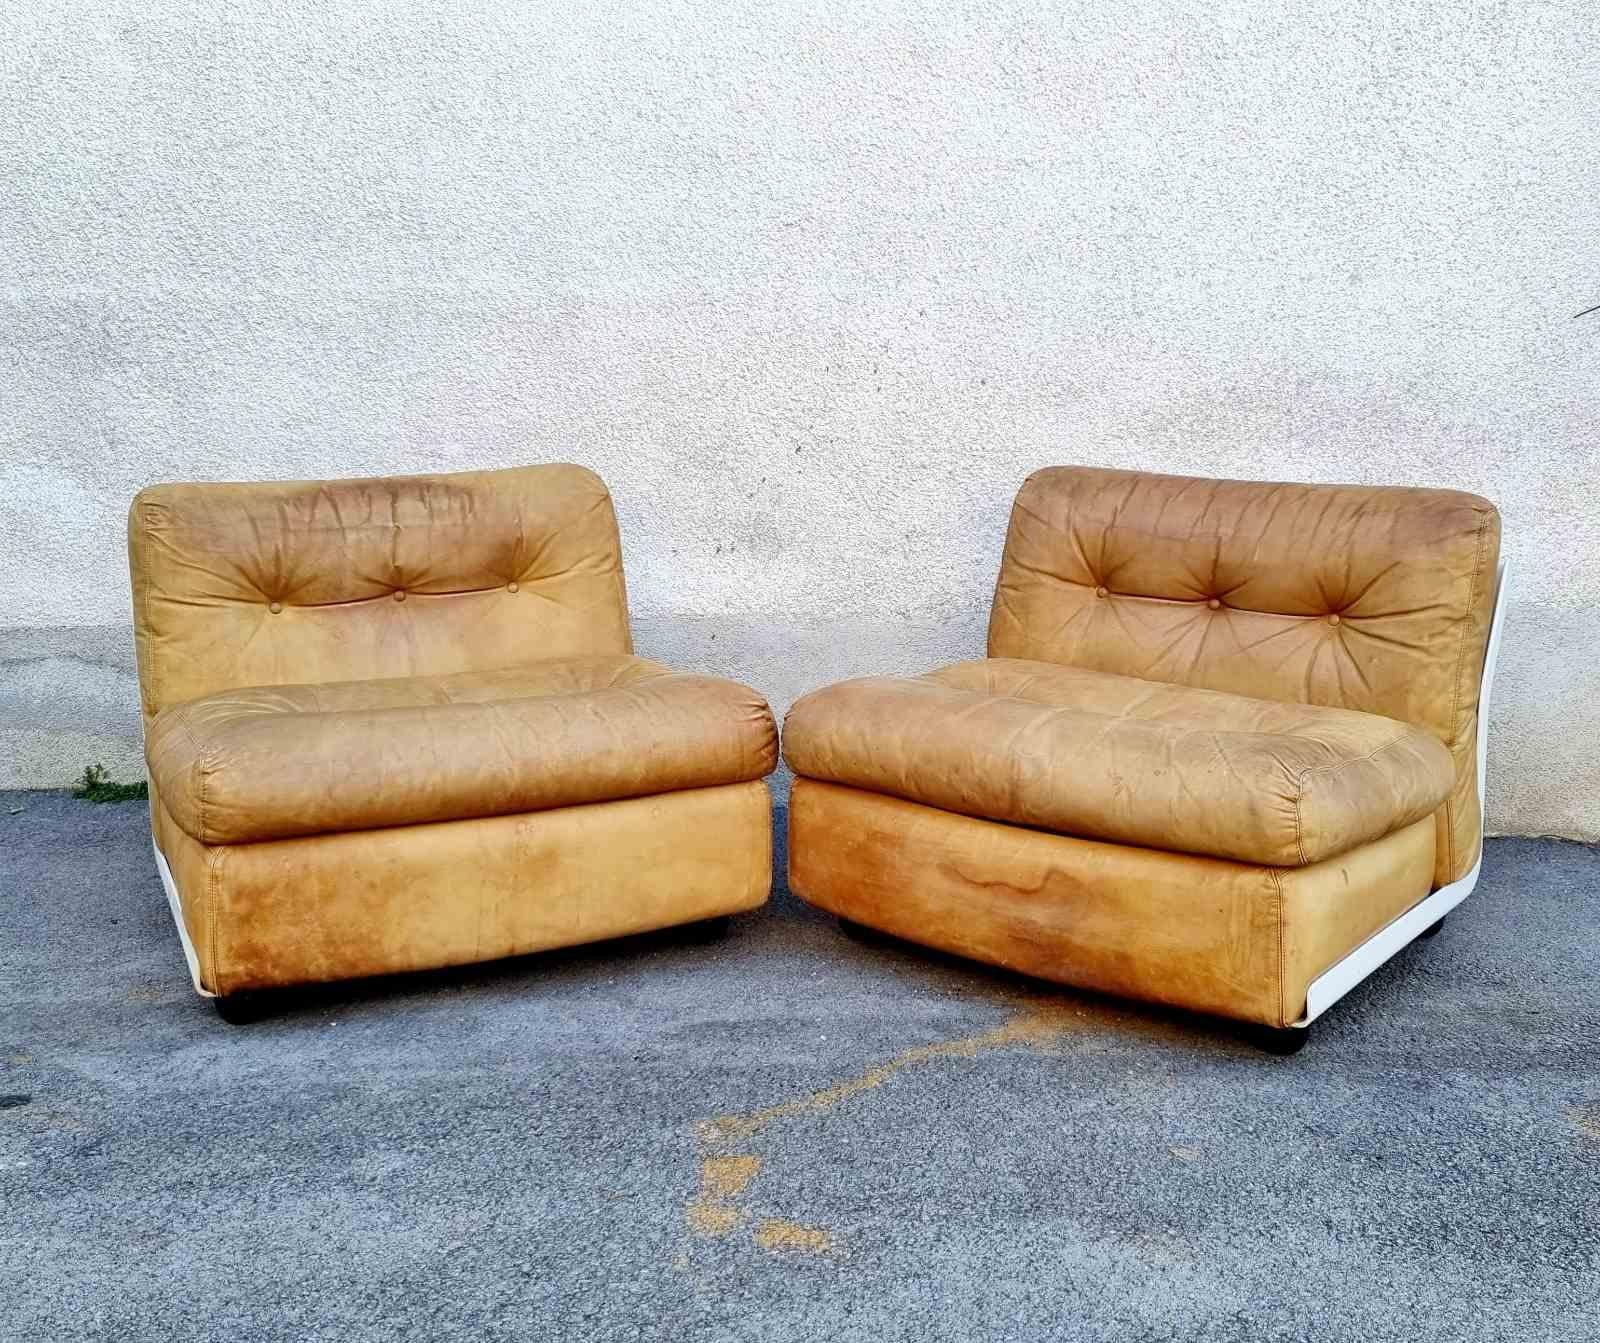 Amanta Modular Leather Sofa by Mario Bellini for C&B Italia, Italy, 1970s, Pair In Good Condition For Sale In Lucija, SI